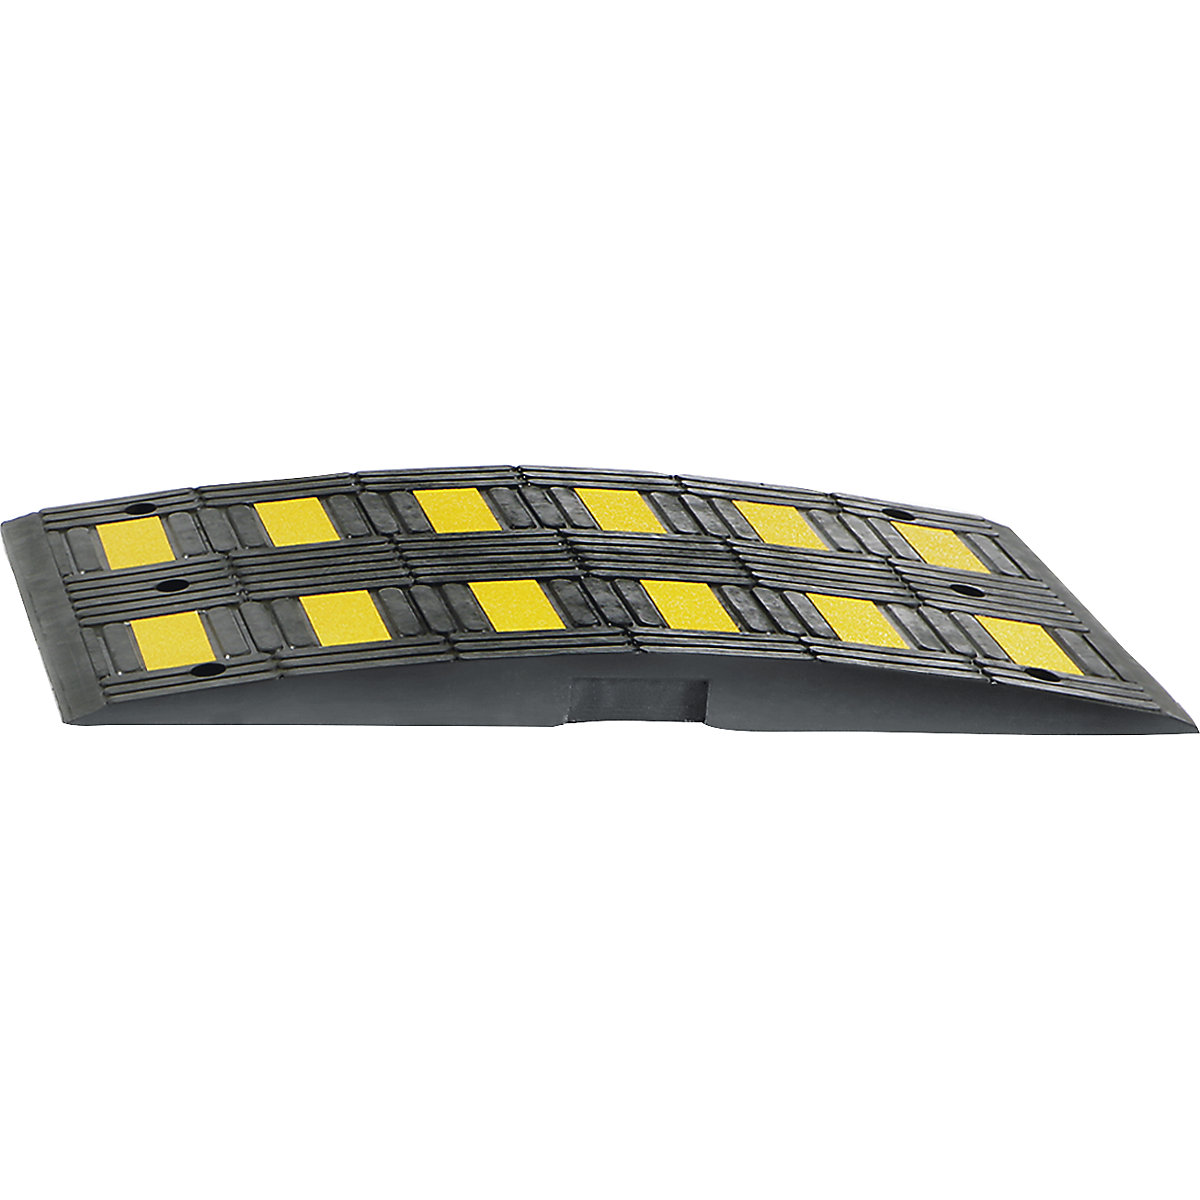 Speed ramp made of recycled rubber, yellow / black, for speed limit 20 km/h-3